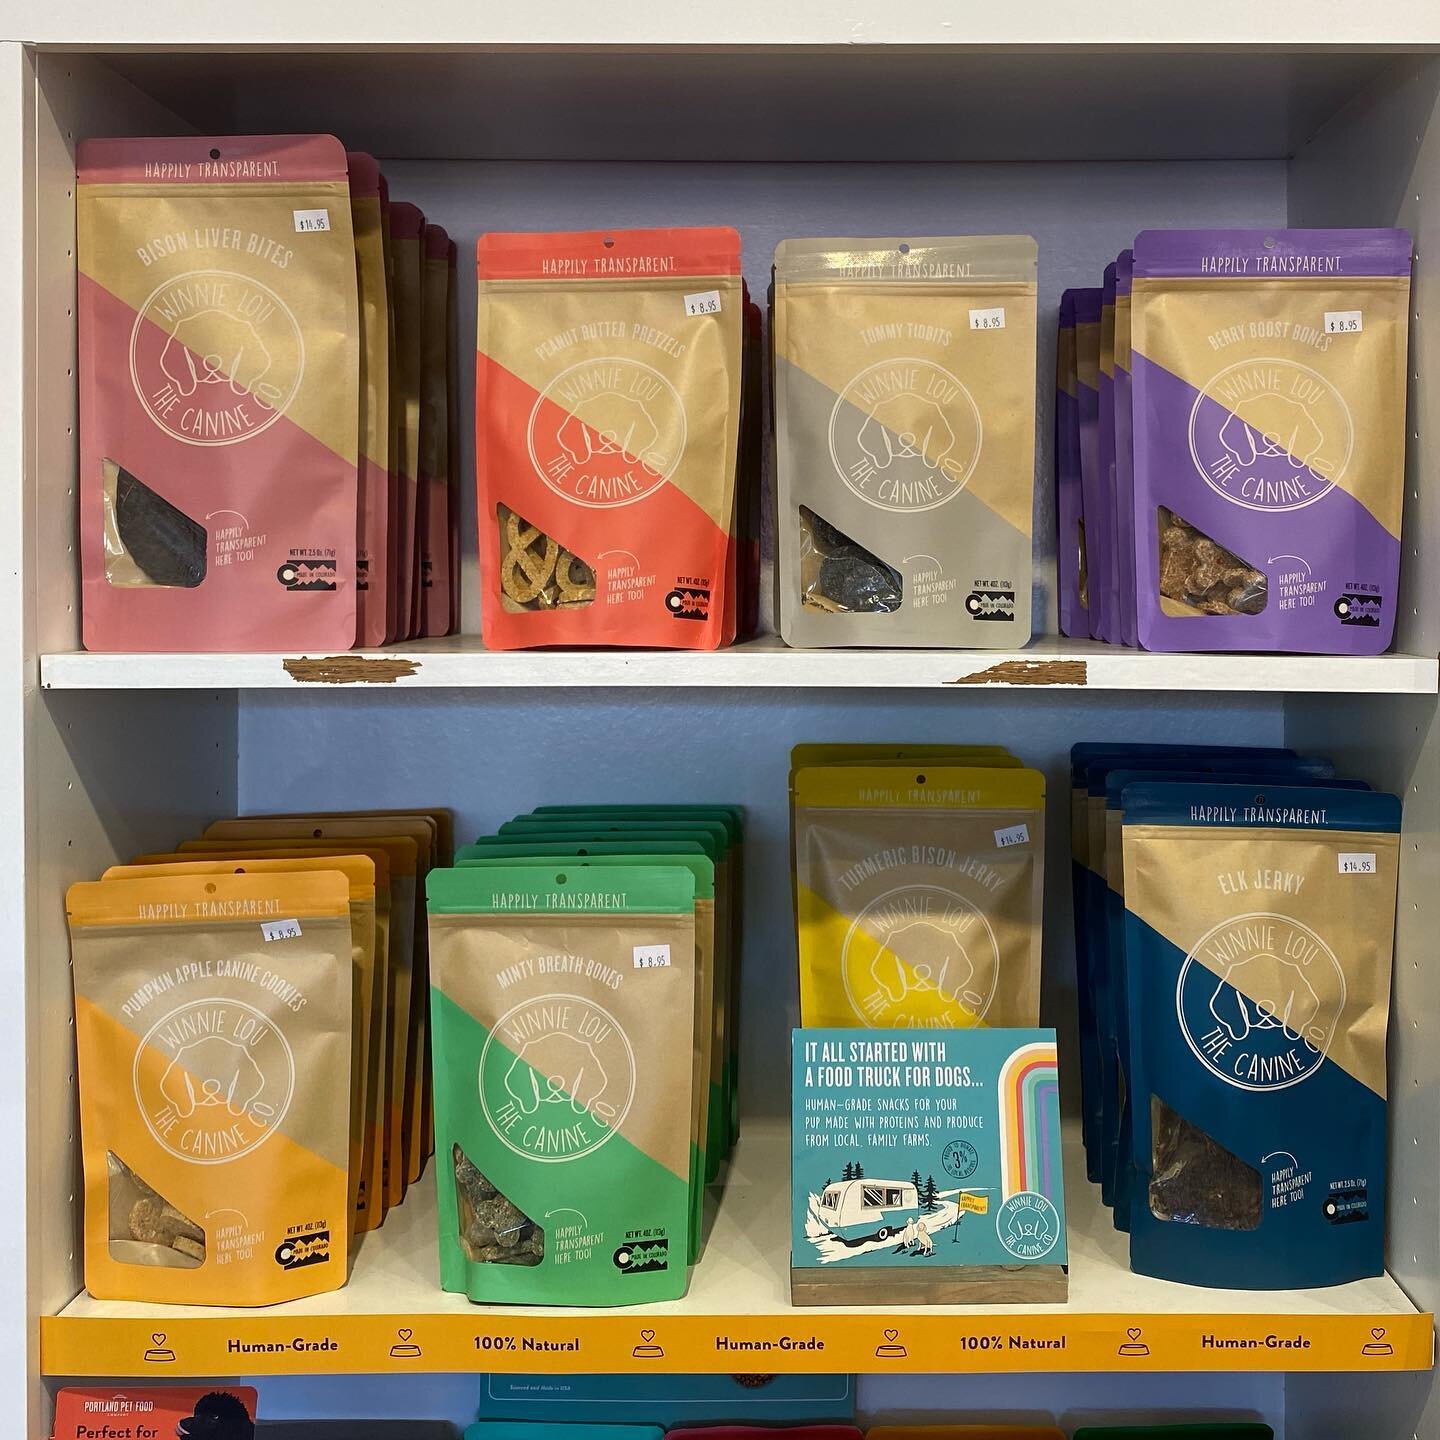 We&rsquo;re so happy to be carrying these treats! Handmade in Colorado, they make every flavor your dog could possibly want; from &ldquo;Tummy Tidbits&rdquo; all the way to various flavors of Bison Jerky😋😋